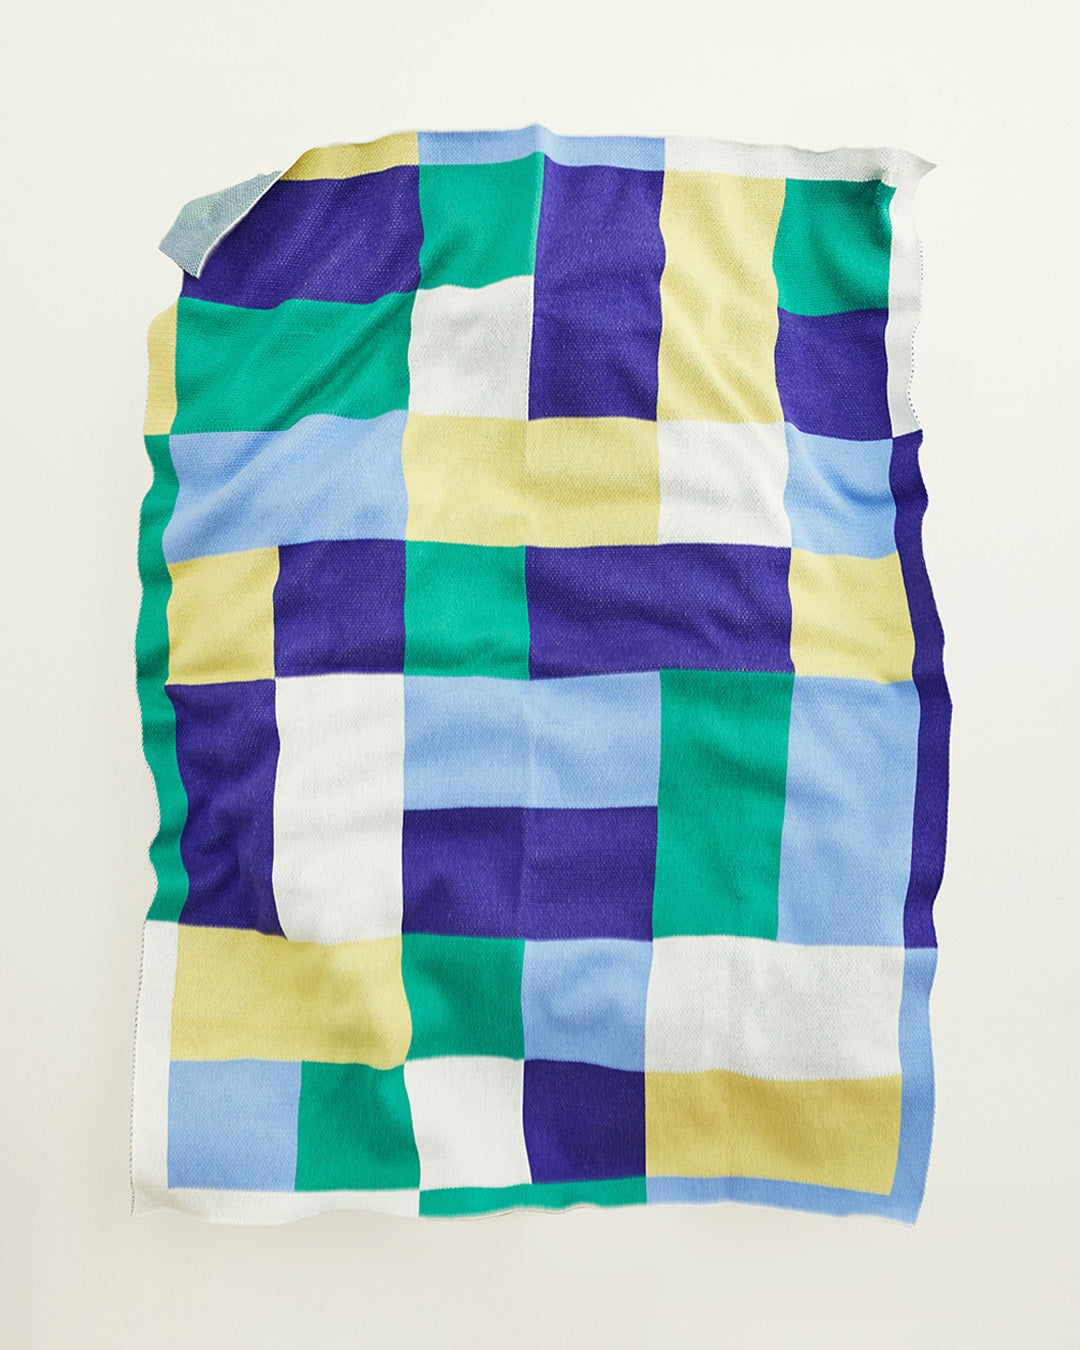 Dusen Dusen Throw in Aubette pattern. Cotton knit throw in periwinkle, indigo, green, white, and chartreuse. 100% cotton, medium weight, soft & cozy. 50" W x 70" H. Machine wash cold, tumble dry low. Made in China